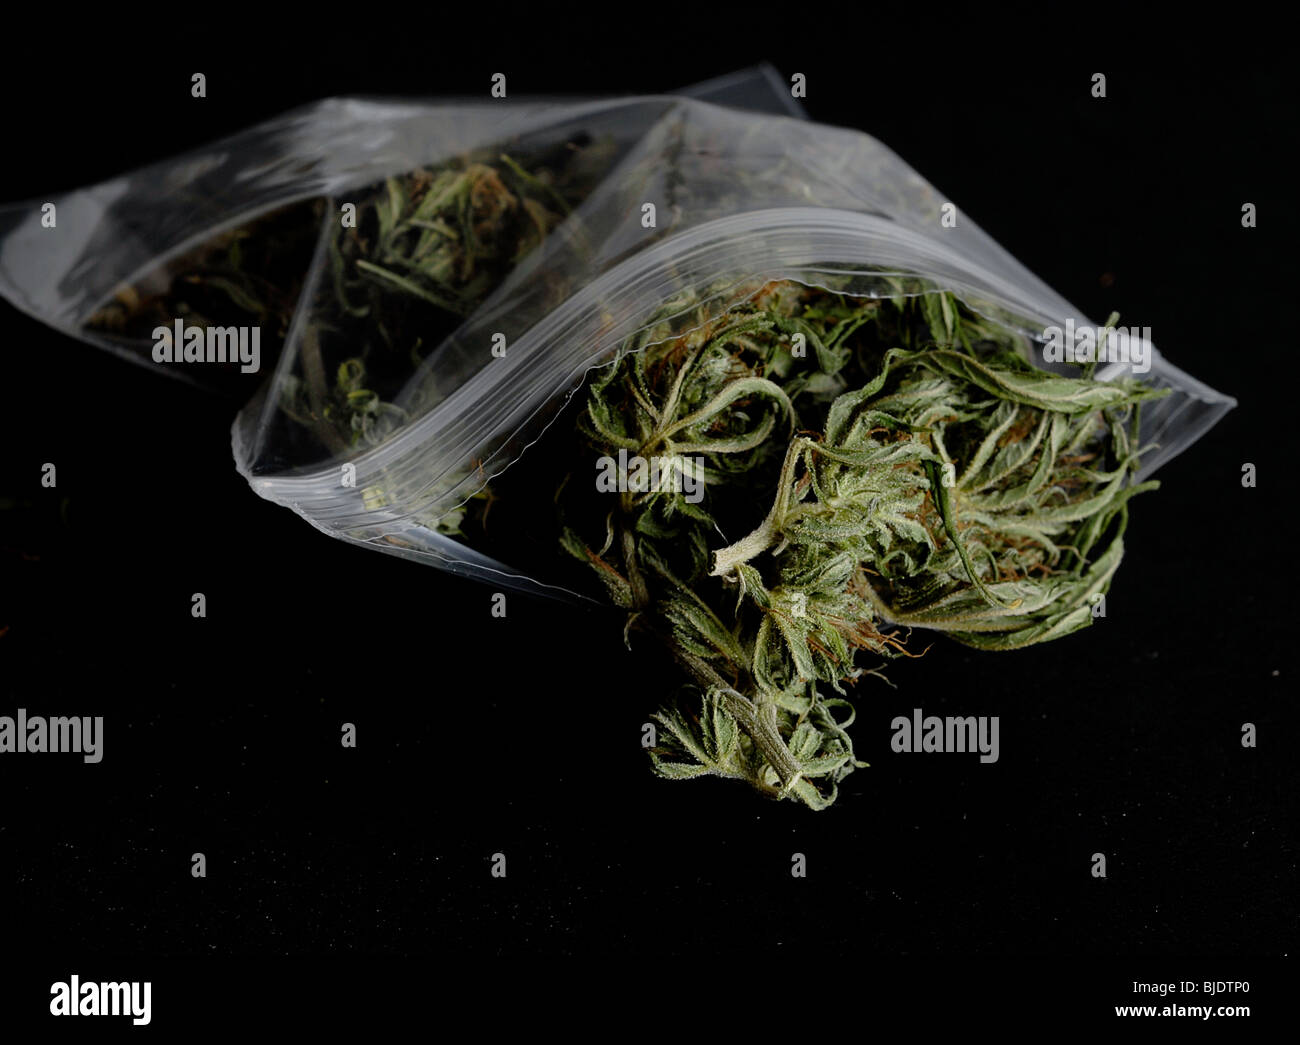 Weed Bag High Resolution Stock Photography and Images - Alamy